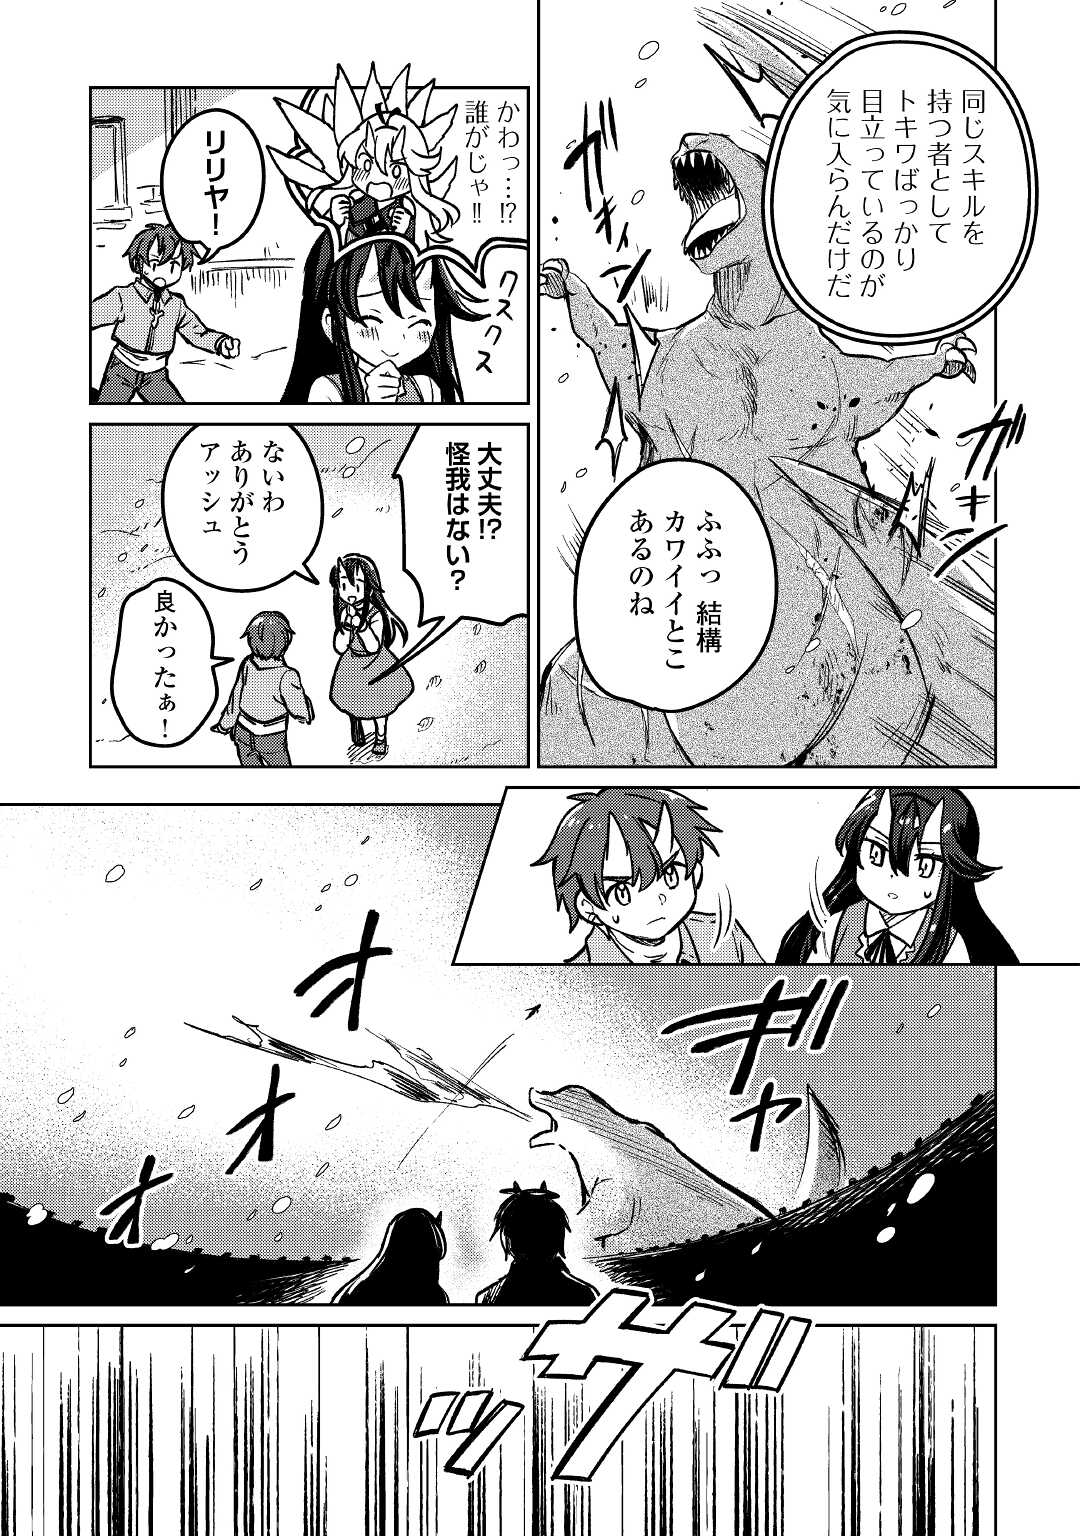 The Former Structural Researcher’s Story of Otherworldly Adventure 第37話 - Page 13